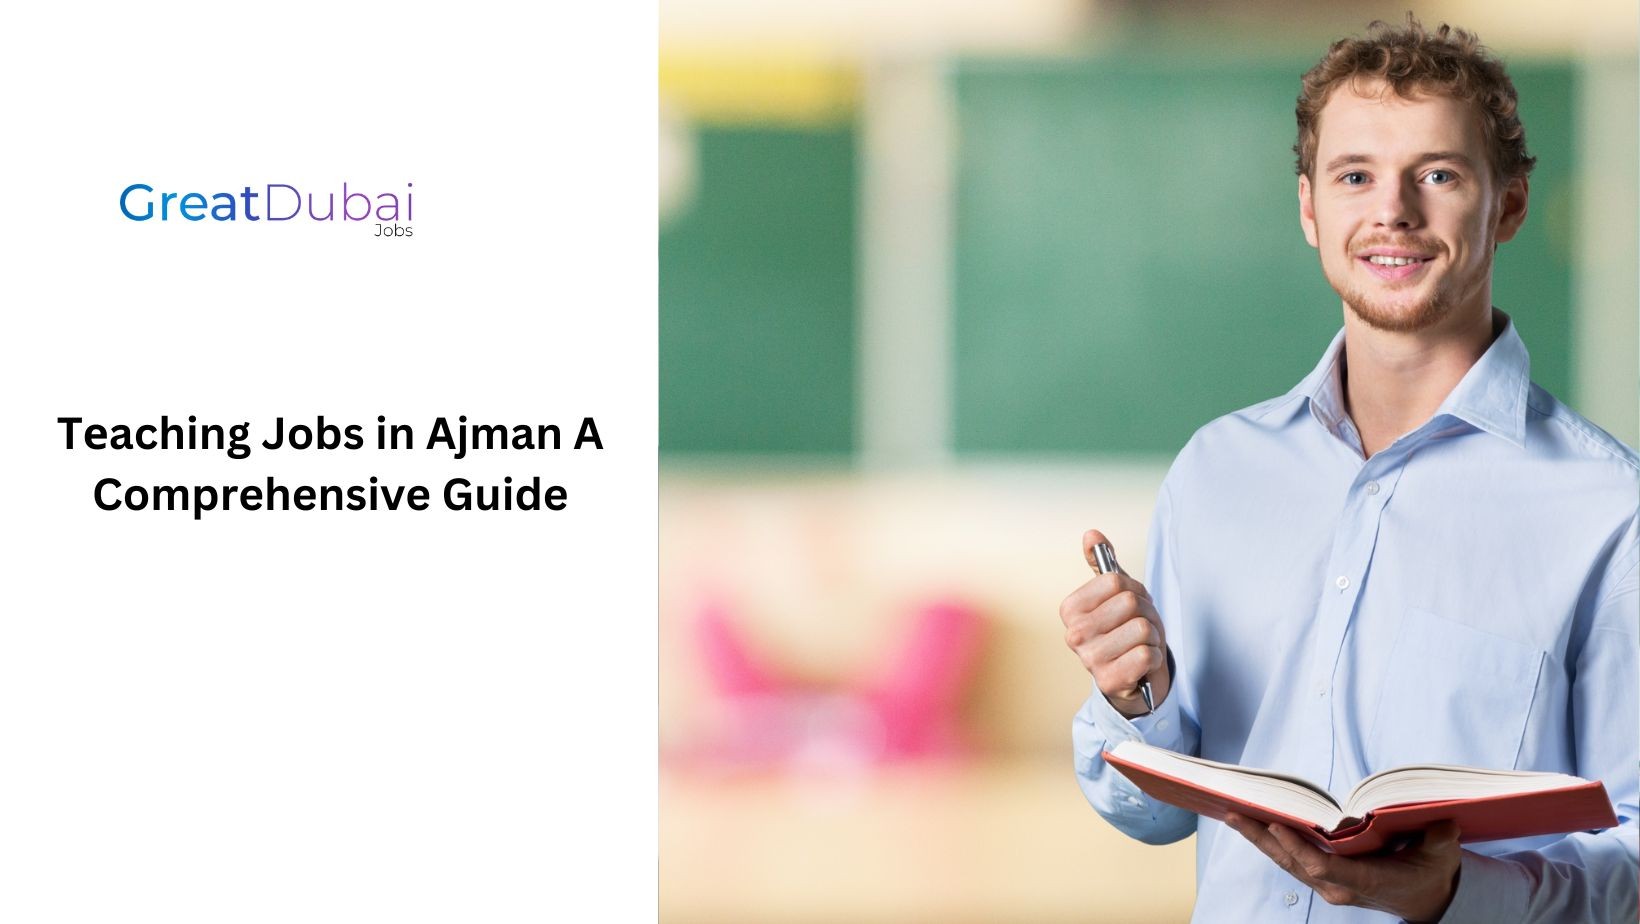 Tеaching Jobs in Ajman A Comprehensive Guide